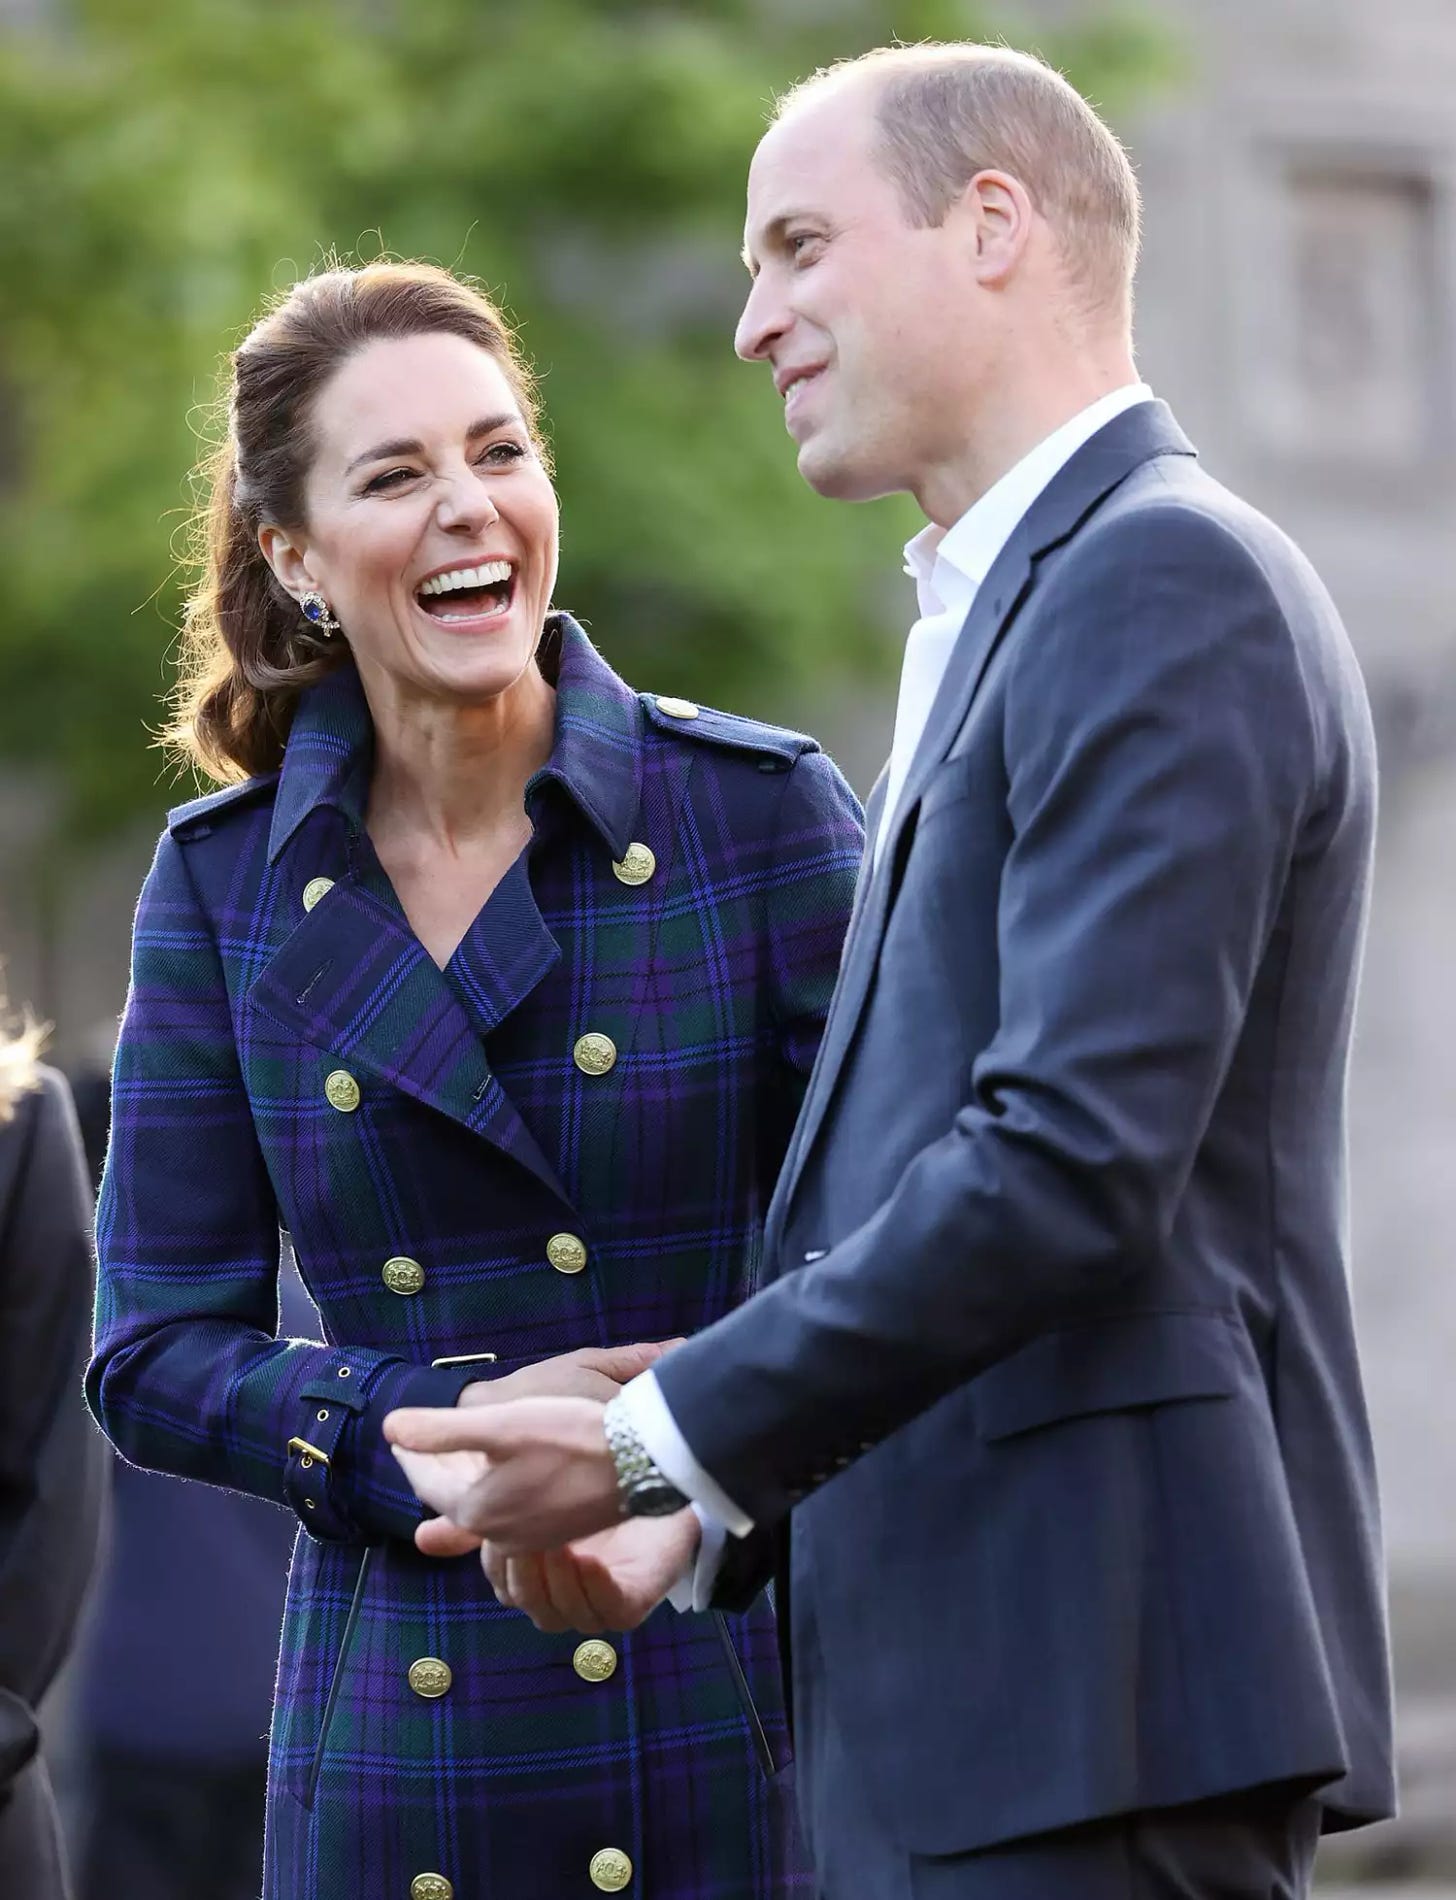 Prince William, Duke of Cambridge and Catherine, Duchess of Cambridge arrive to host NHS Charities Together and NHS staff at a unique drive-in cinema to watch a special screening of Disney’s Cruella at the Palace of Holyroodhouse on day six of their week-long visit to Scotland on May 26, 2021 in Edinburgh, Scotland